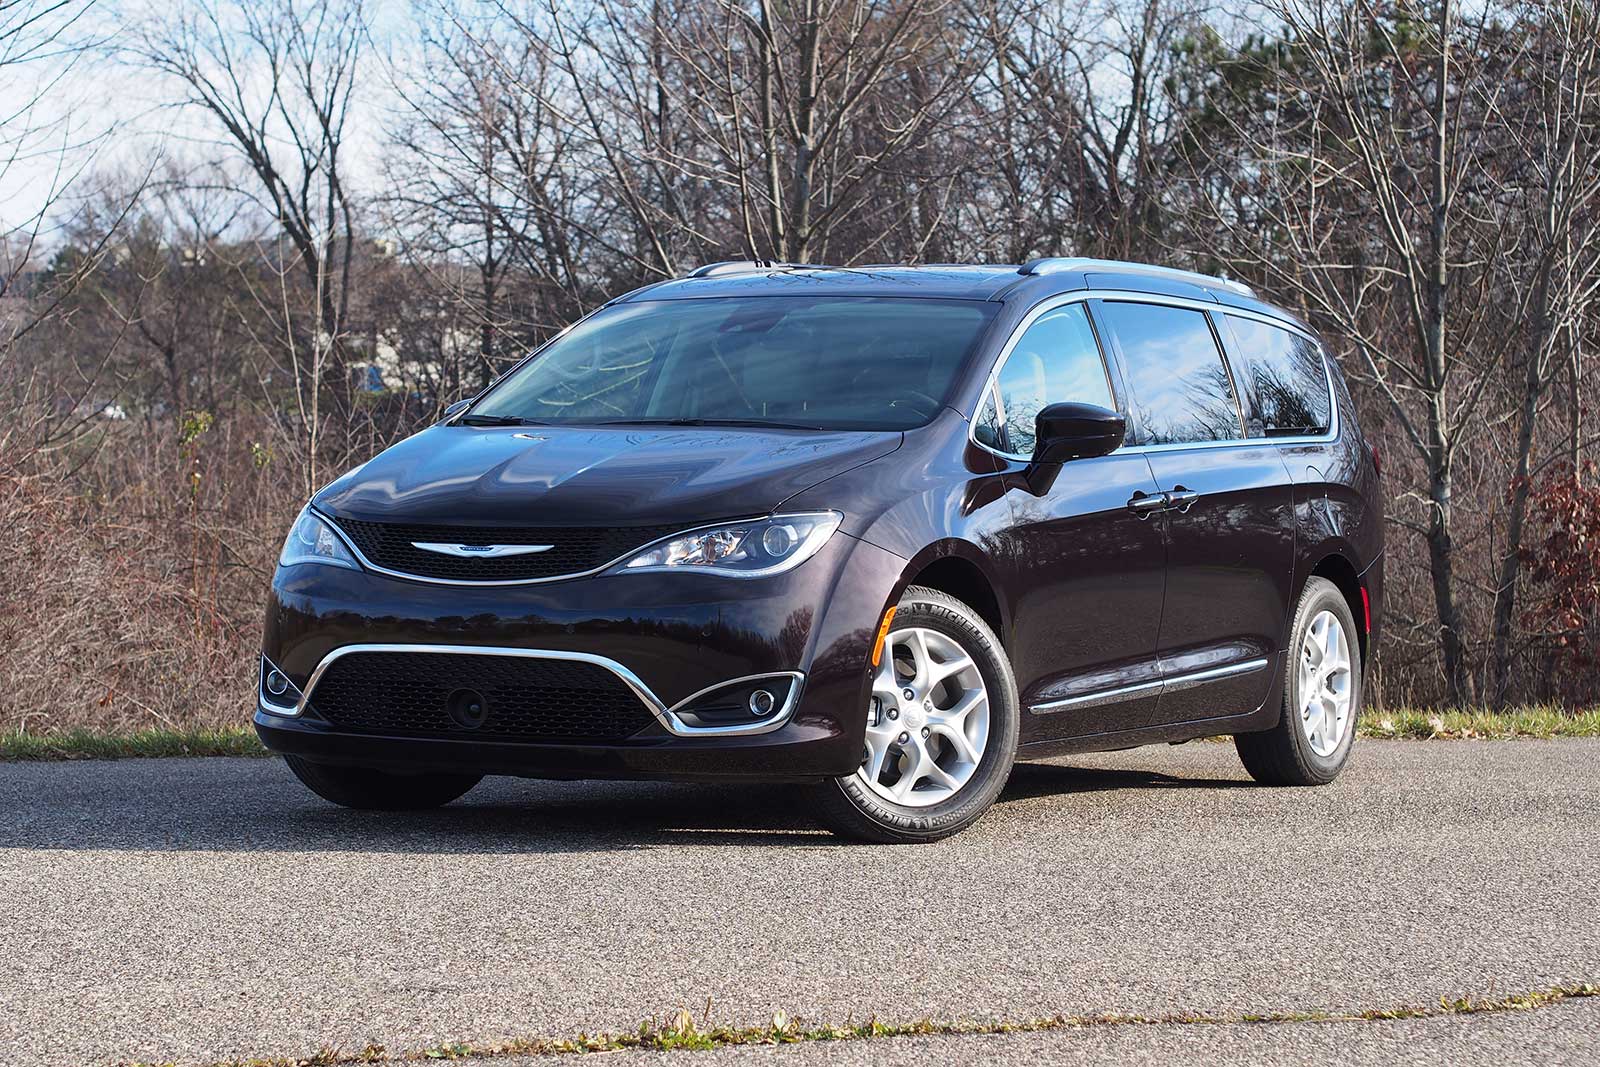 2018 chrysler pacifica touring plus user manual free download